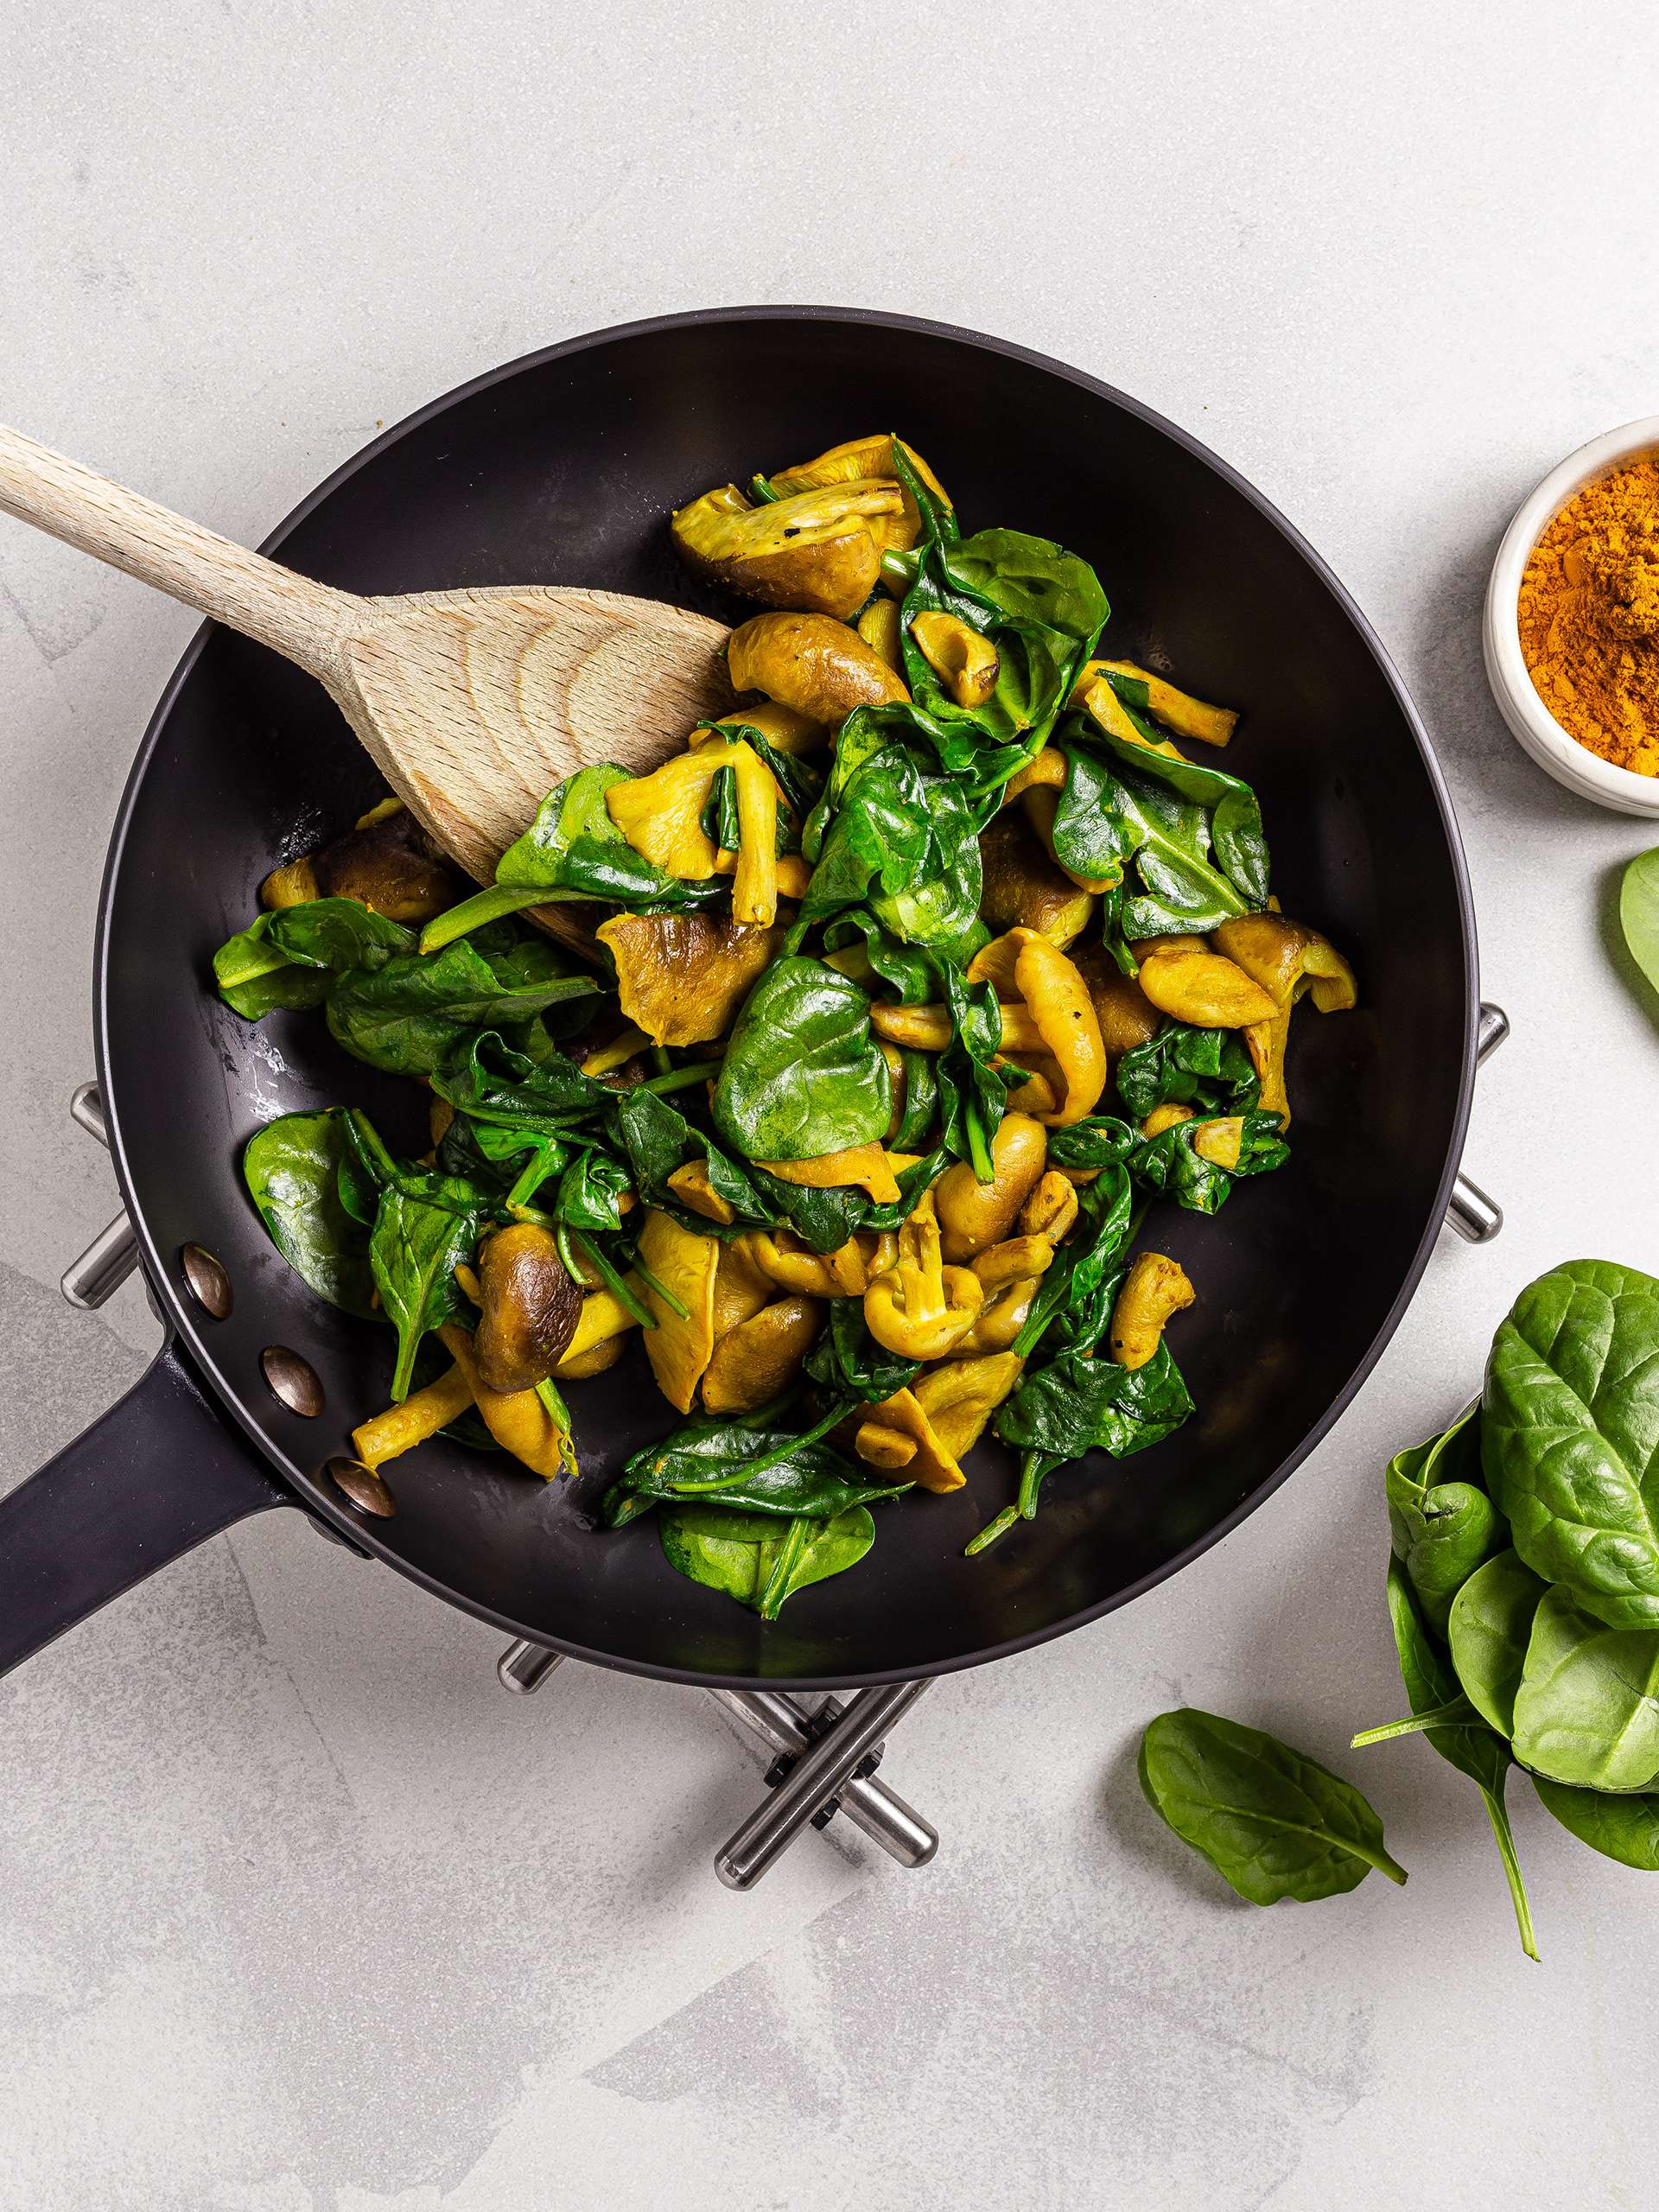 Cooked spinach and mushrooms with turmeric